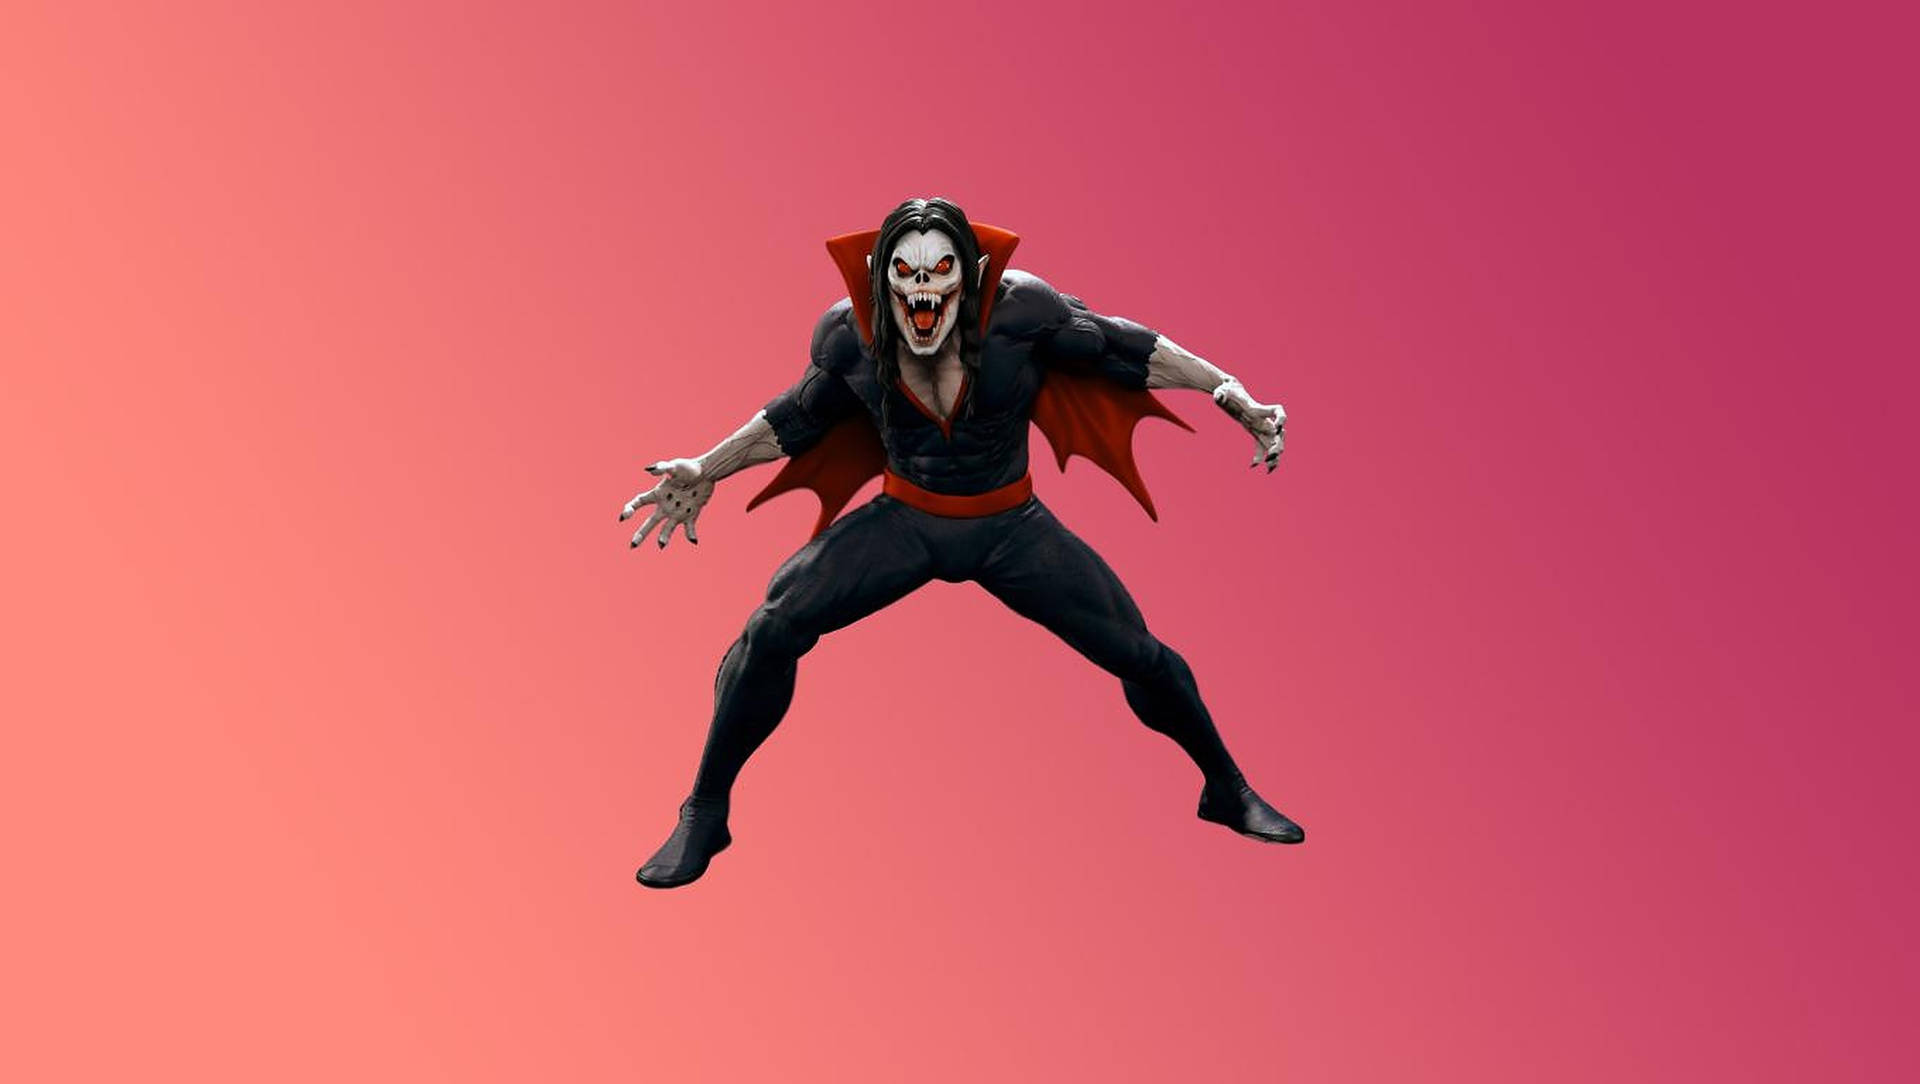 Top 999+ Morbius Wallpapers Full HD, 4K✅Free to Use